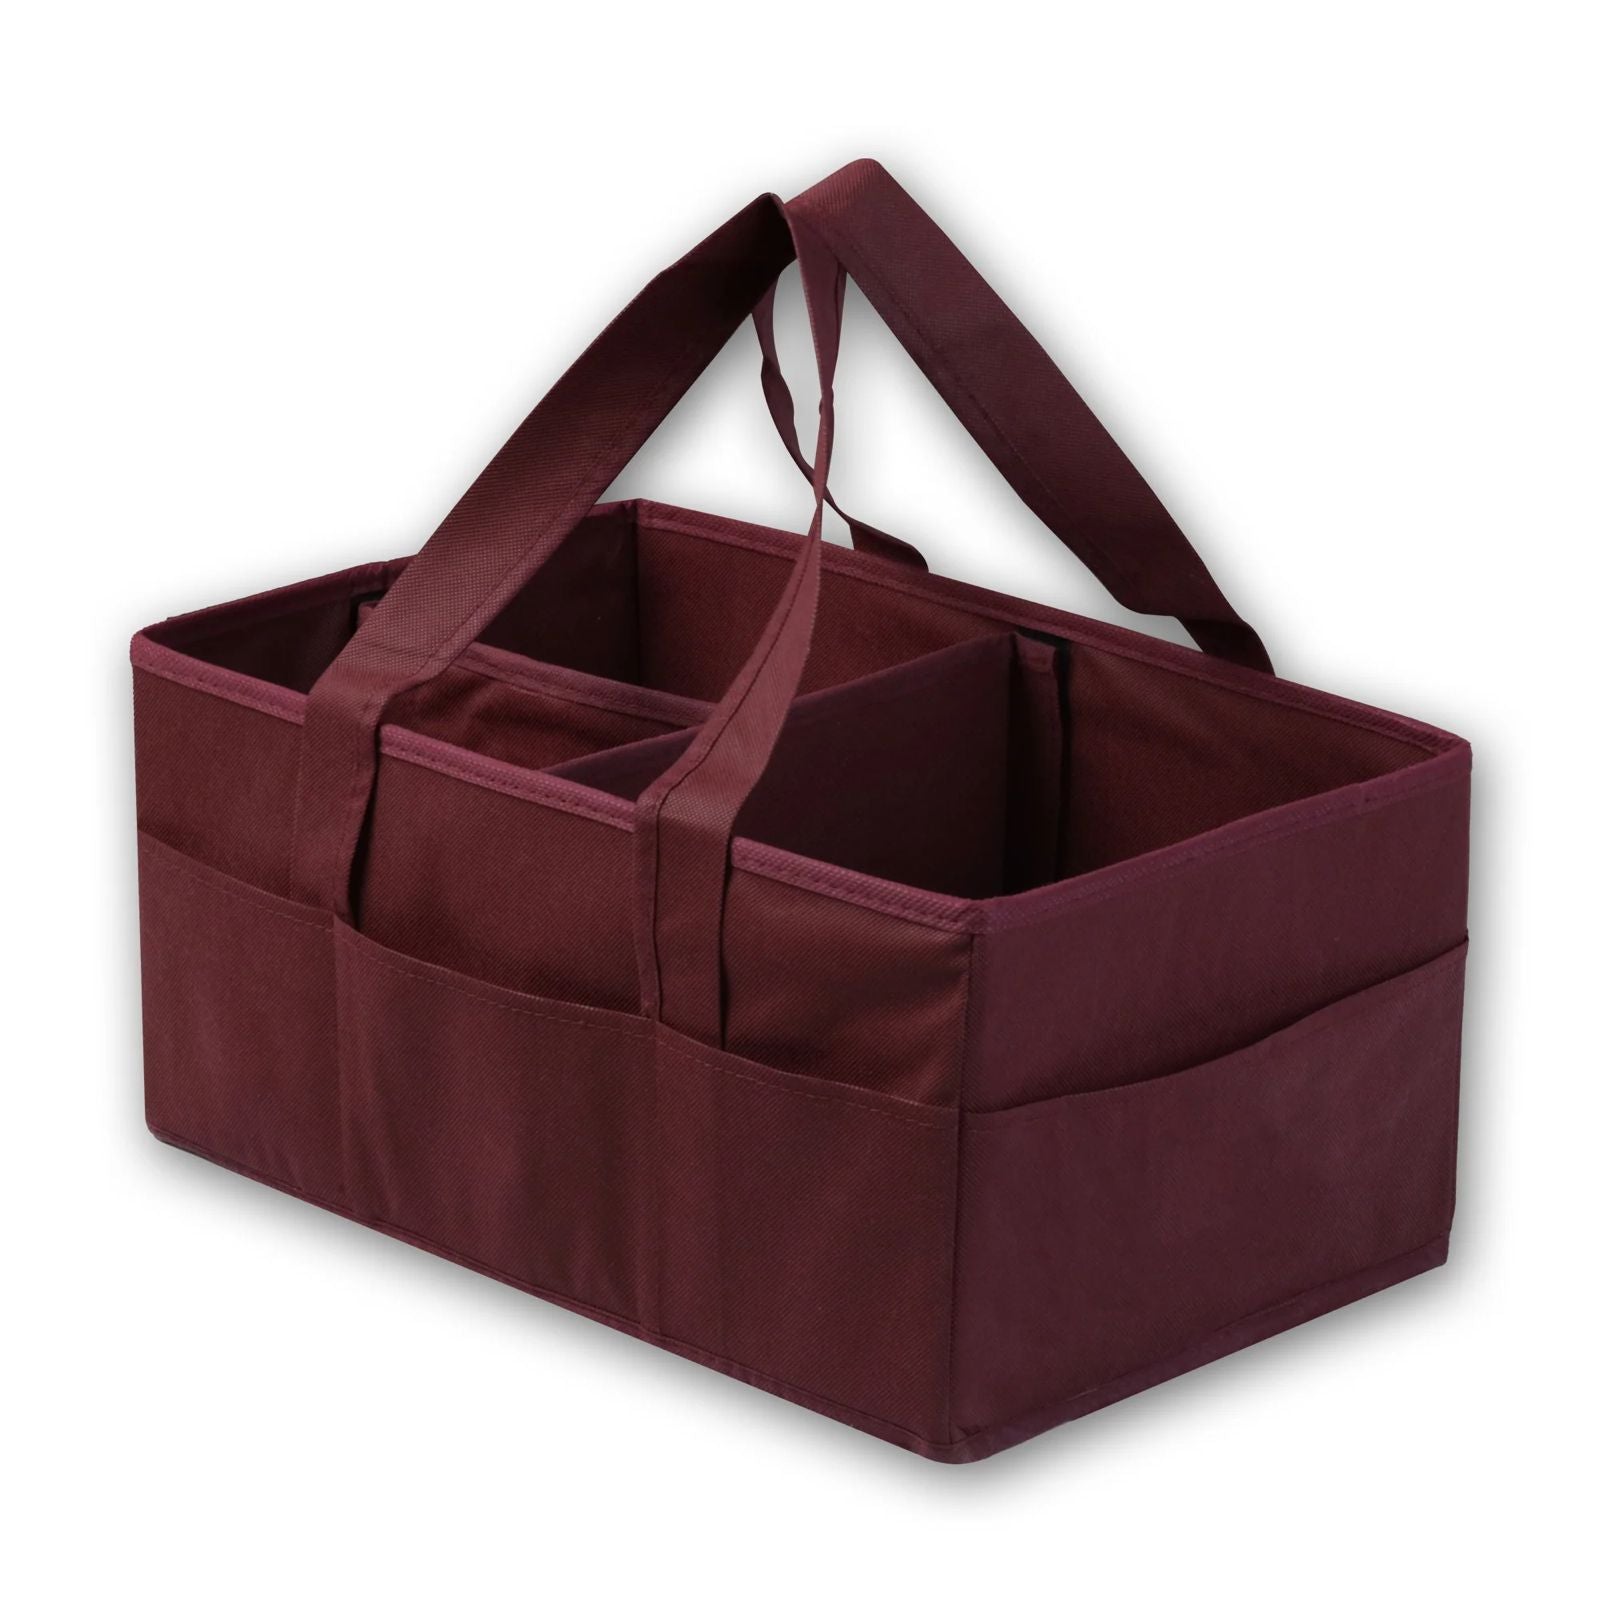 Portable Large Maroon Diaper Caddy Baby Diaper Organizer